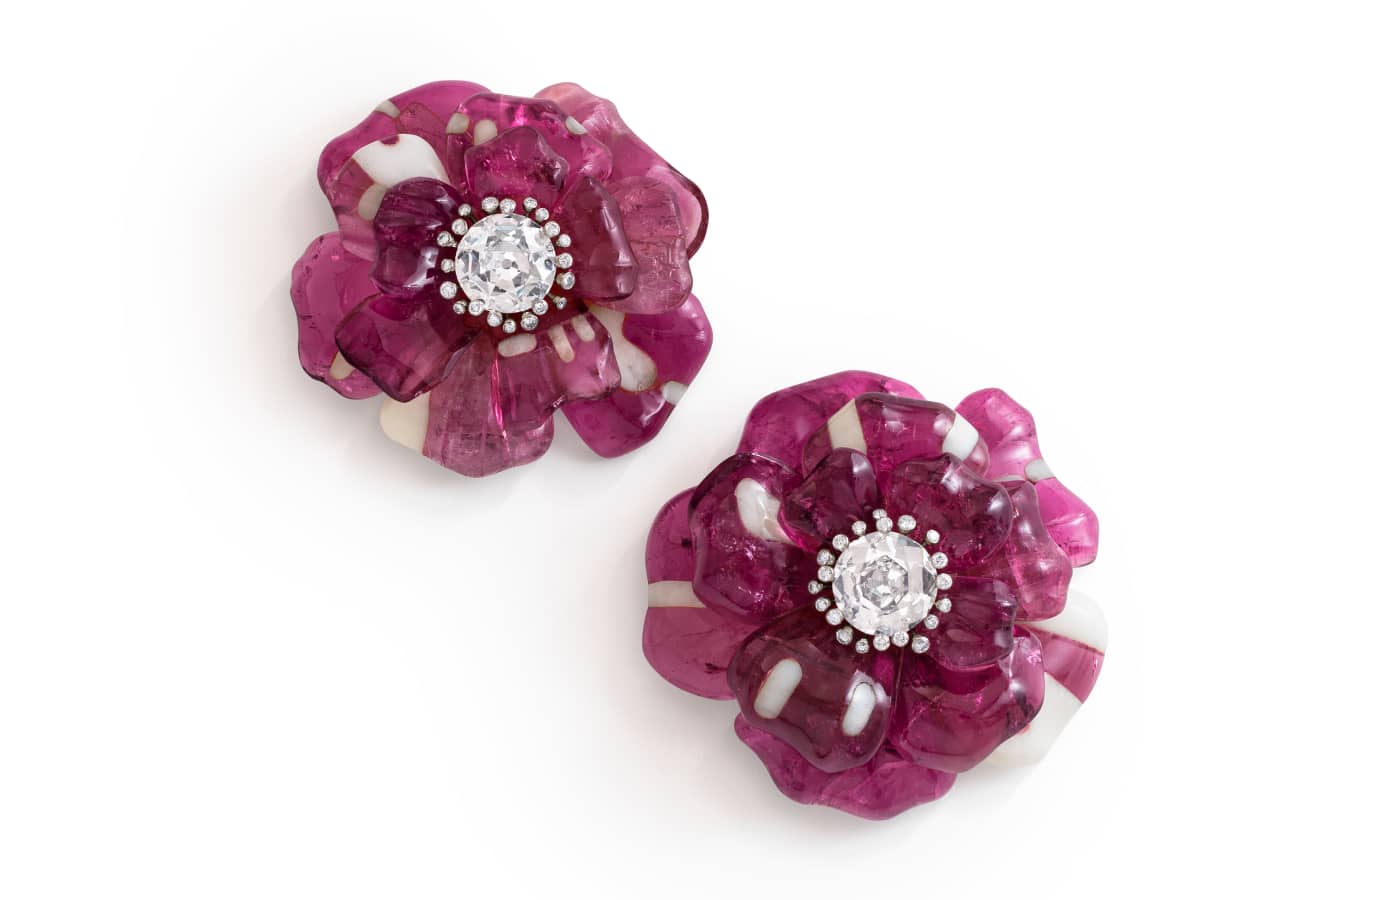 JAR ‘Camelia’ brooches with pink tourmaline and white agate petals, and round diamonds in platinum and 18k white gold, 1985, due to be sold at the Christie’s Magnificent Jewels auction on 17 May 2023